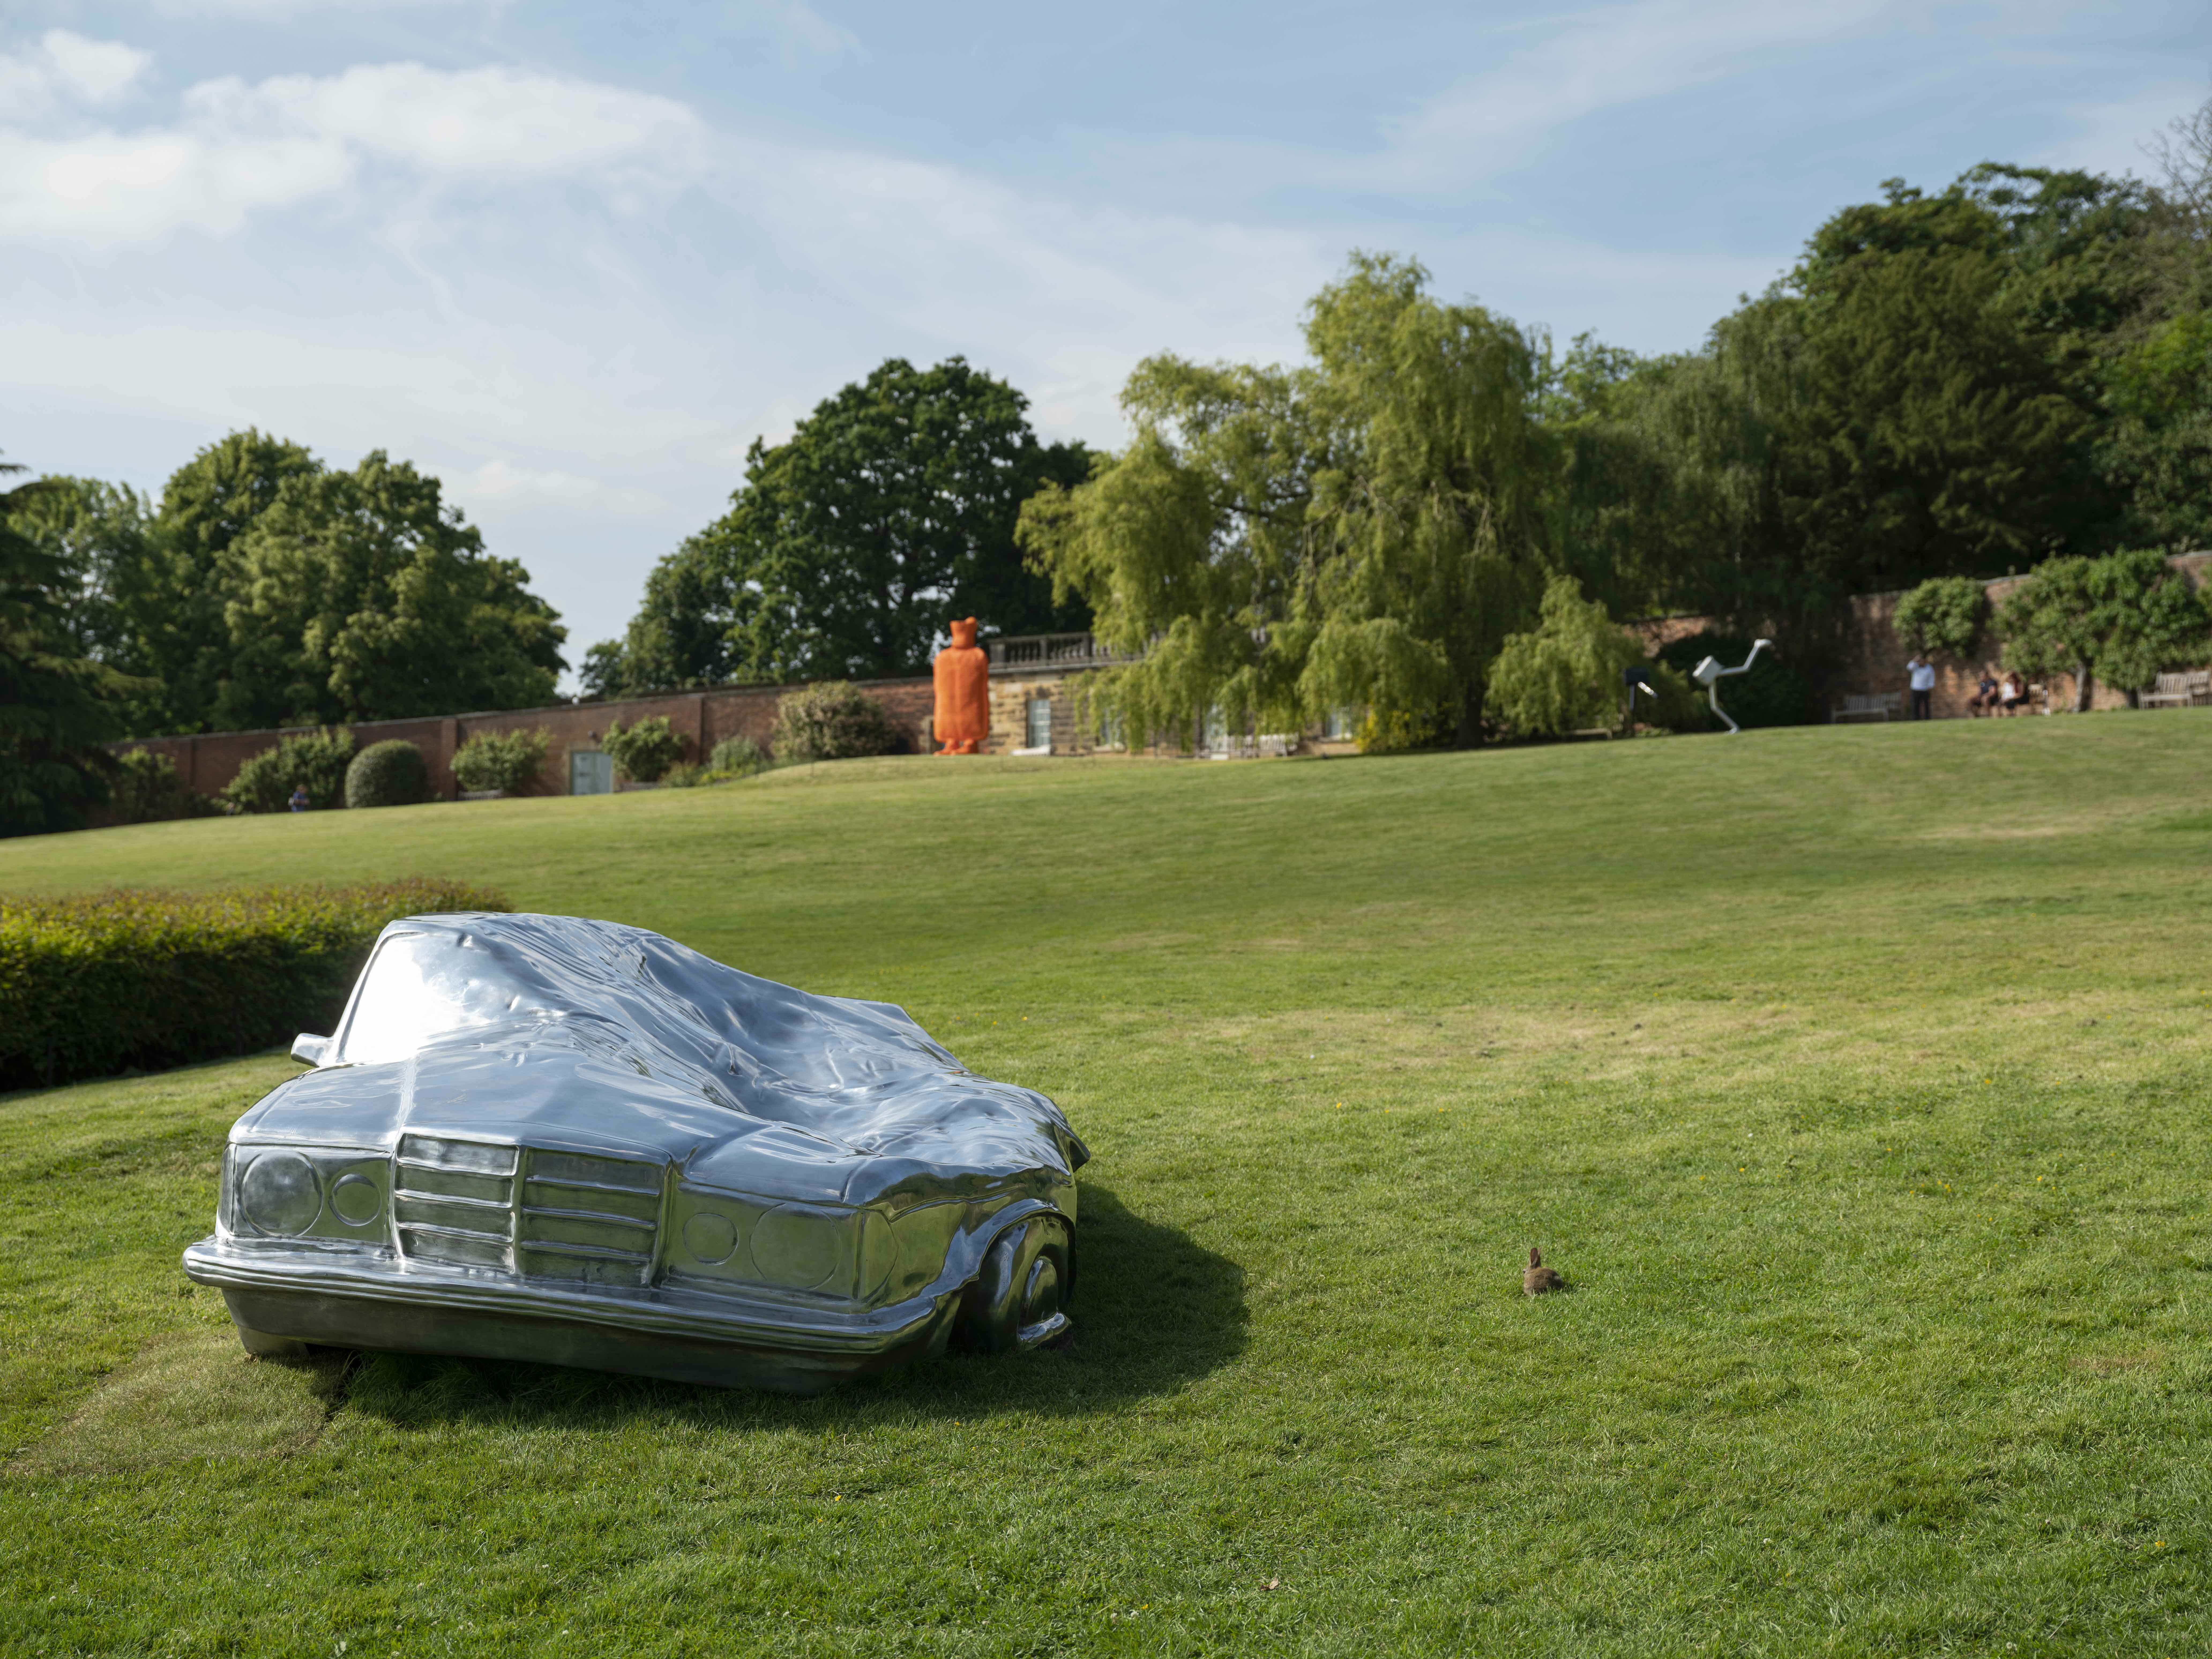 A silver squashed car on the lawn and a orange hot water bottle in the distance